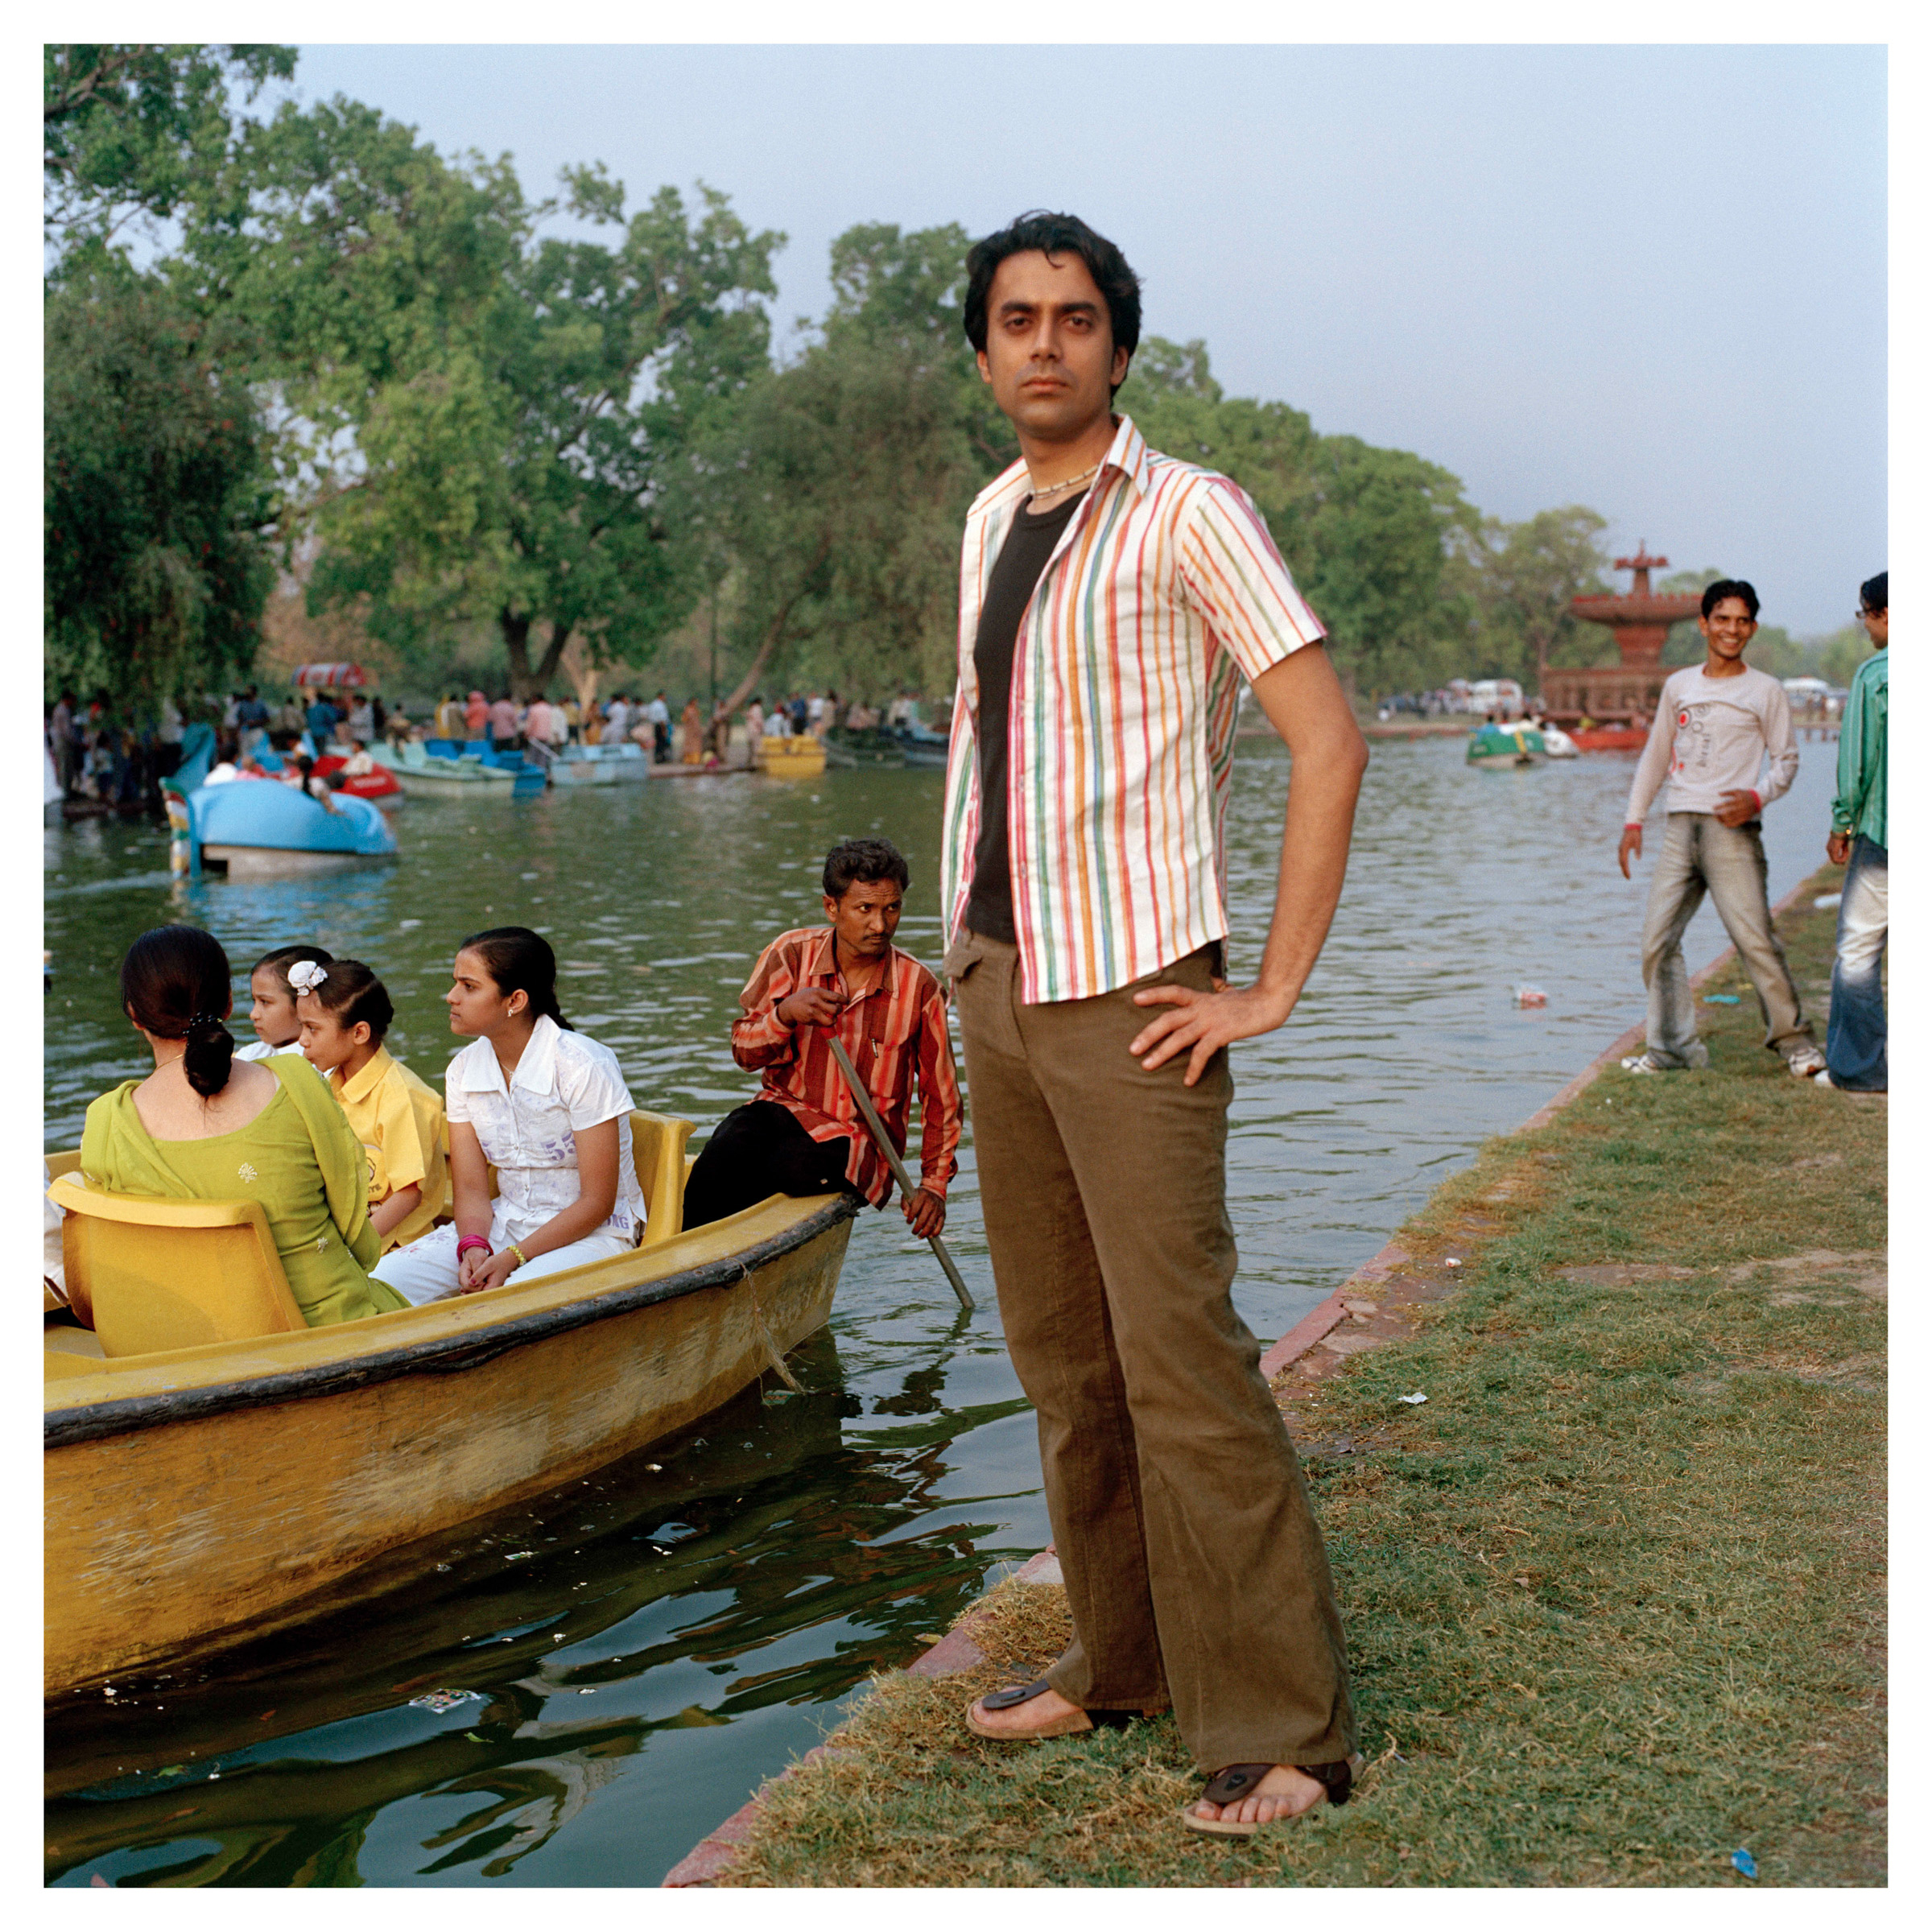     Sunil Gupta, Bikram, from the series Mr. Malhotra’s Party, 2009 (printed 2020). Courtesy of the artist and Hales Gallery, London and New York; Stephen Bulger Gallery, Toronto; and Vadehra Art Gallery, New Delhi. © Sunil Gupta. All Rights Reserved, DACS 2022

